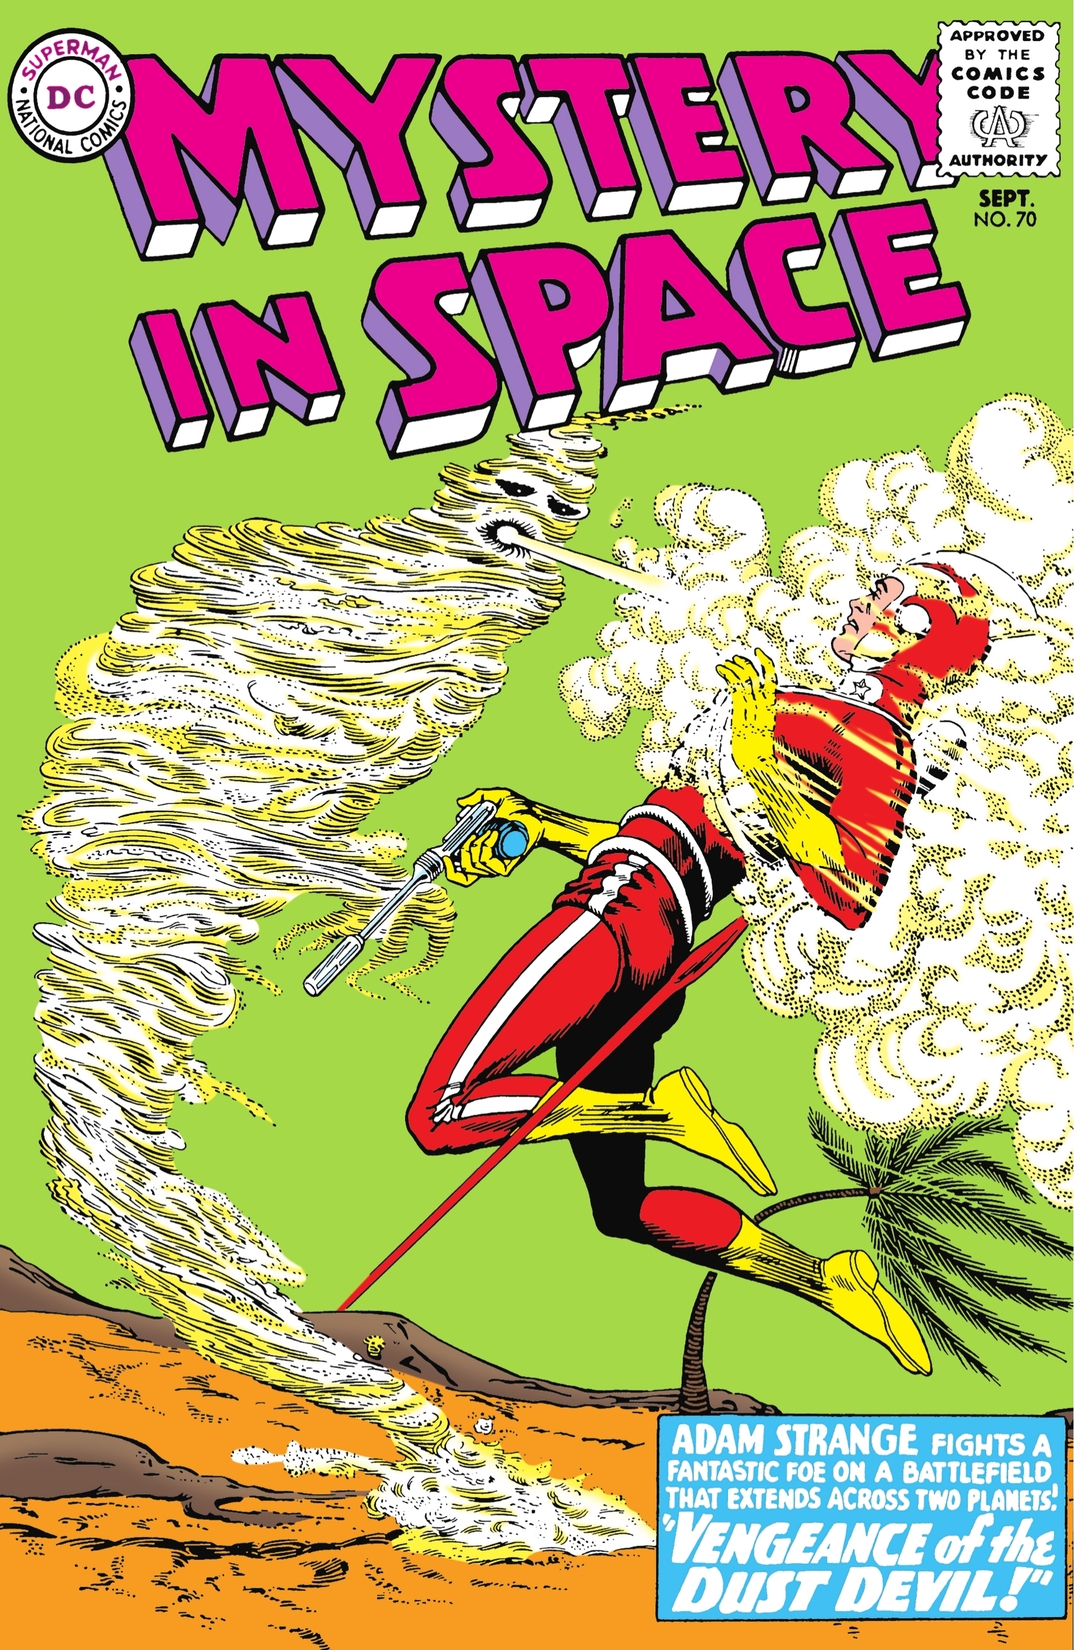 Mystery in Space (1951-) #70 preview images